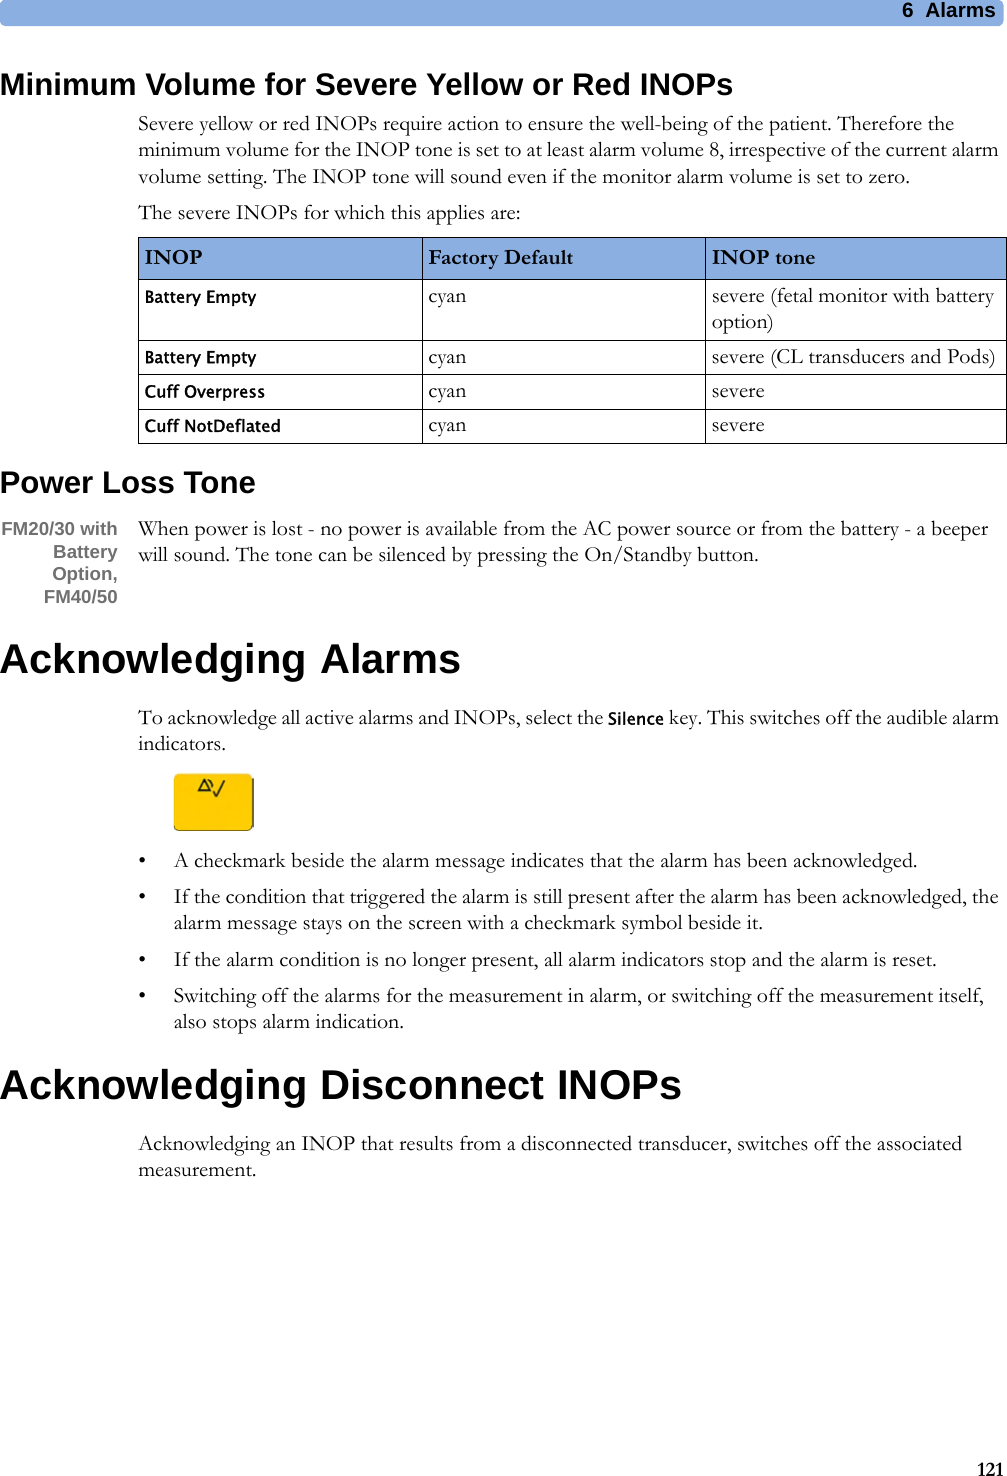 6  Alarms121Minimum Volume for Severe Yellow or Red INOPsSevere yellow or red INOPs require action to ensure the well-being of the patient. Therefore the minimum volume for the INOP tone is set to at least alarm volume 8, irrespective of the current alarm volume setting. The INOP tone will sound even if the monitor alarm volume is set to zero.The severe INOPs for which this applies are:Power Loss ToneFM20/30 with Battery Option,FM40/50When power is lost - no power is available from the AC power source or from the battery - a beeper will sound. The tone can be silenced by pressing the On/Standby button.Acknowledging AlarmsTo acknowledge all active alarms and INOPs, select the Silence key. This switches off the audible alarm indicators.• A checkmark beside the alarm message indicates that the alarm has been acknowledged.• If the condition that triggered the alarm is still present after the alarm has been acknowledged, the alarm message stays on the screen with a checkmark symbol beside it.• If the alarm condition is no longer present, all alarm indicators stop and the alarm is reset.• Switching off the alarms for the measurement in alarm, or switching off the measurement itself, also stops alarm indication.Acknowledging Disconnect INOPsAcknowledging an INOP that results from a disconnected transducer, switches off the associated measurement.INOP Factory Default INOP toneBattery Empty cyan severe (fetal monitor with battery option)Battery Empty cyan severe (CL transducers and Pods)Cuff Overpress cyan severeCuff NotDeflated cyan severe